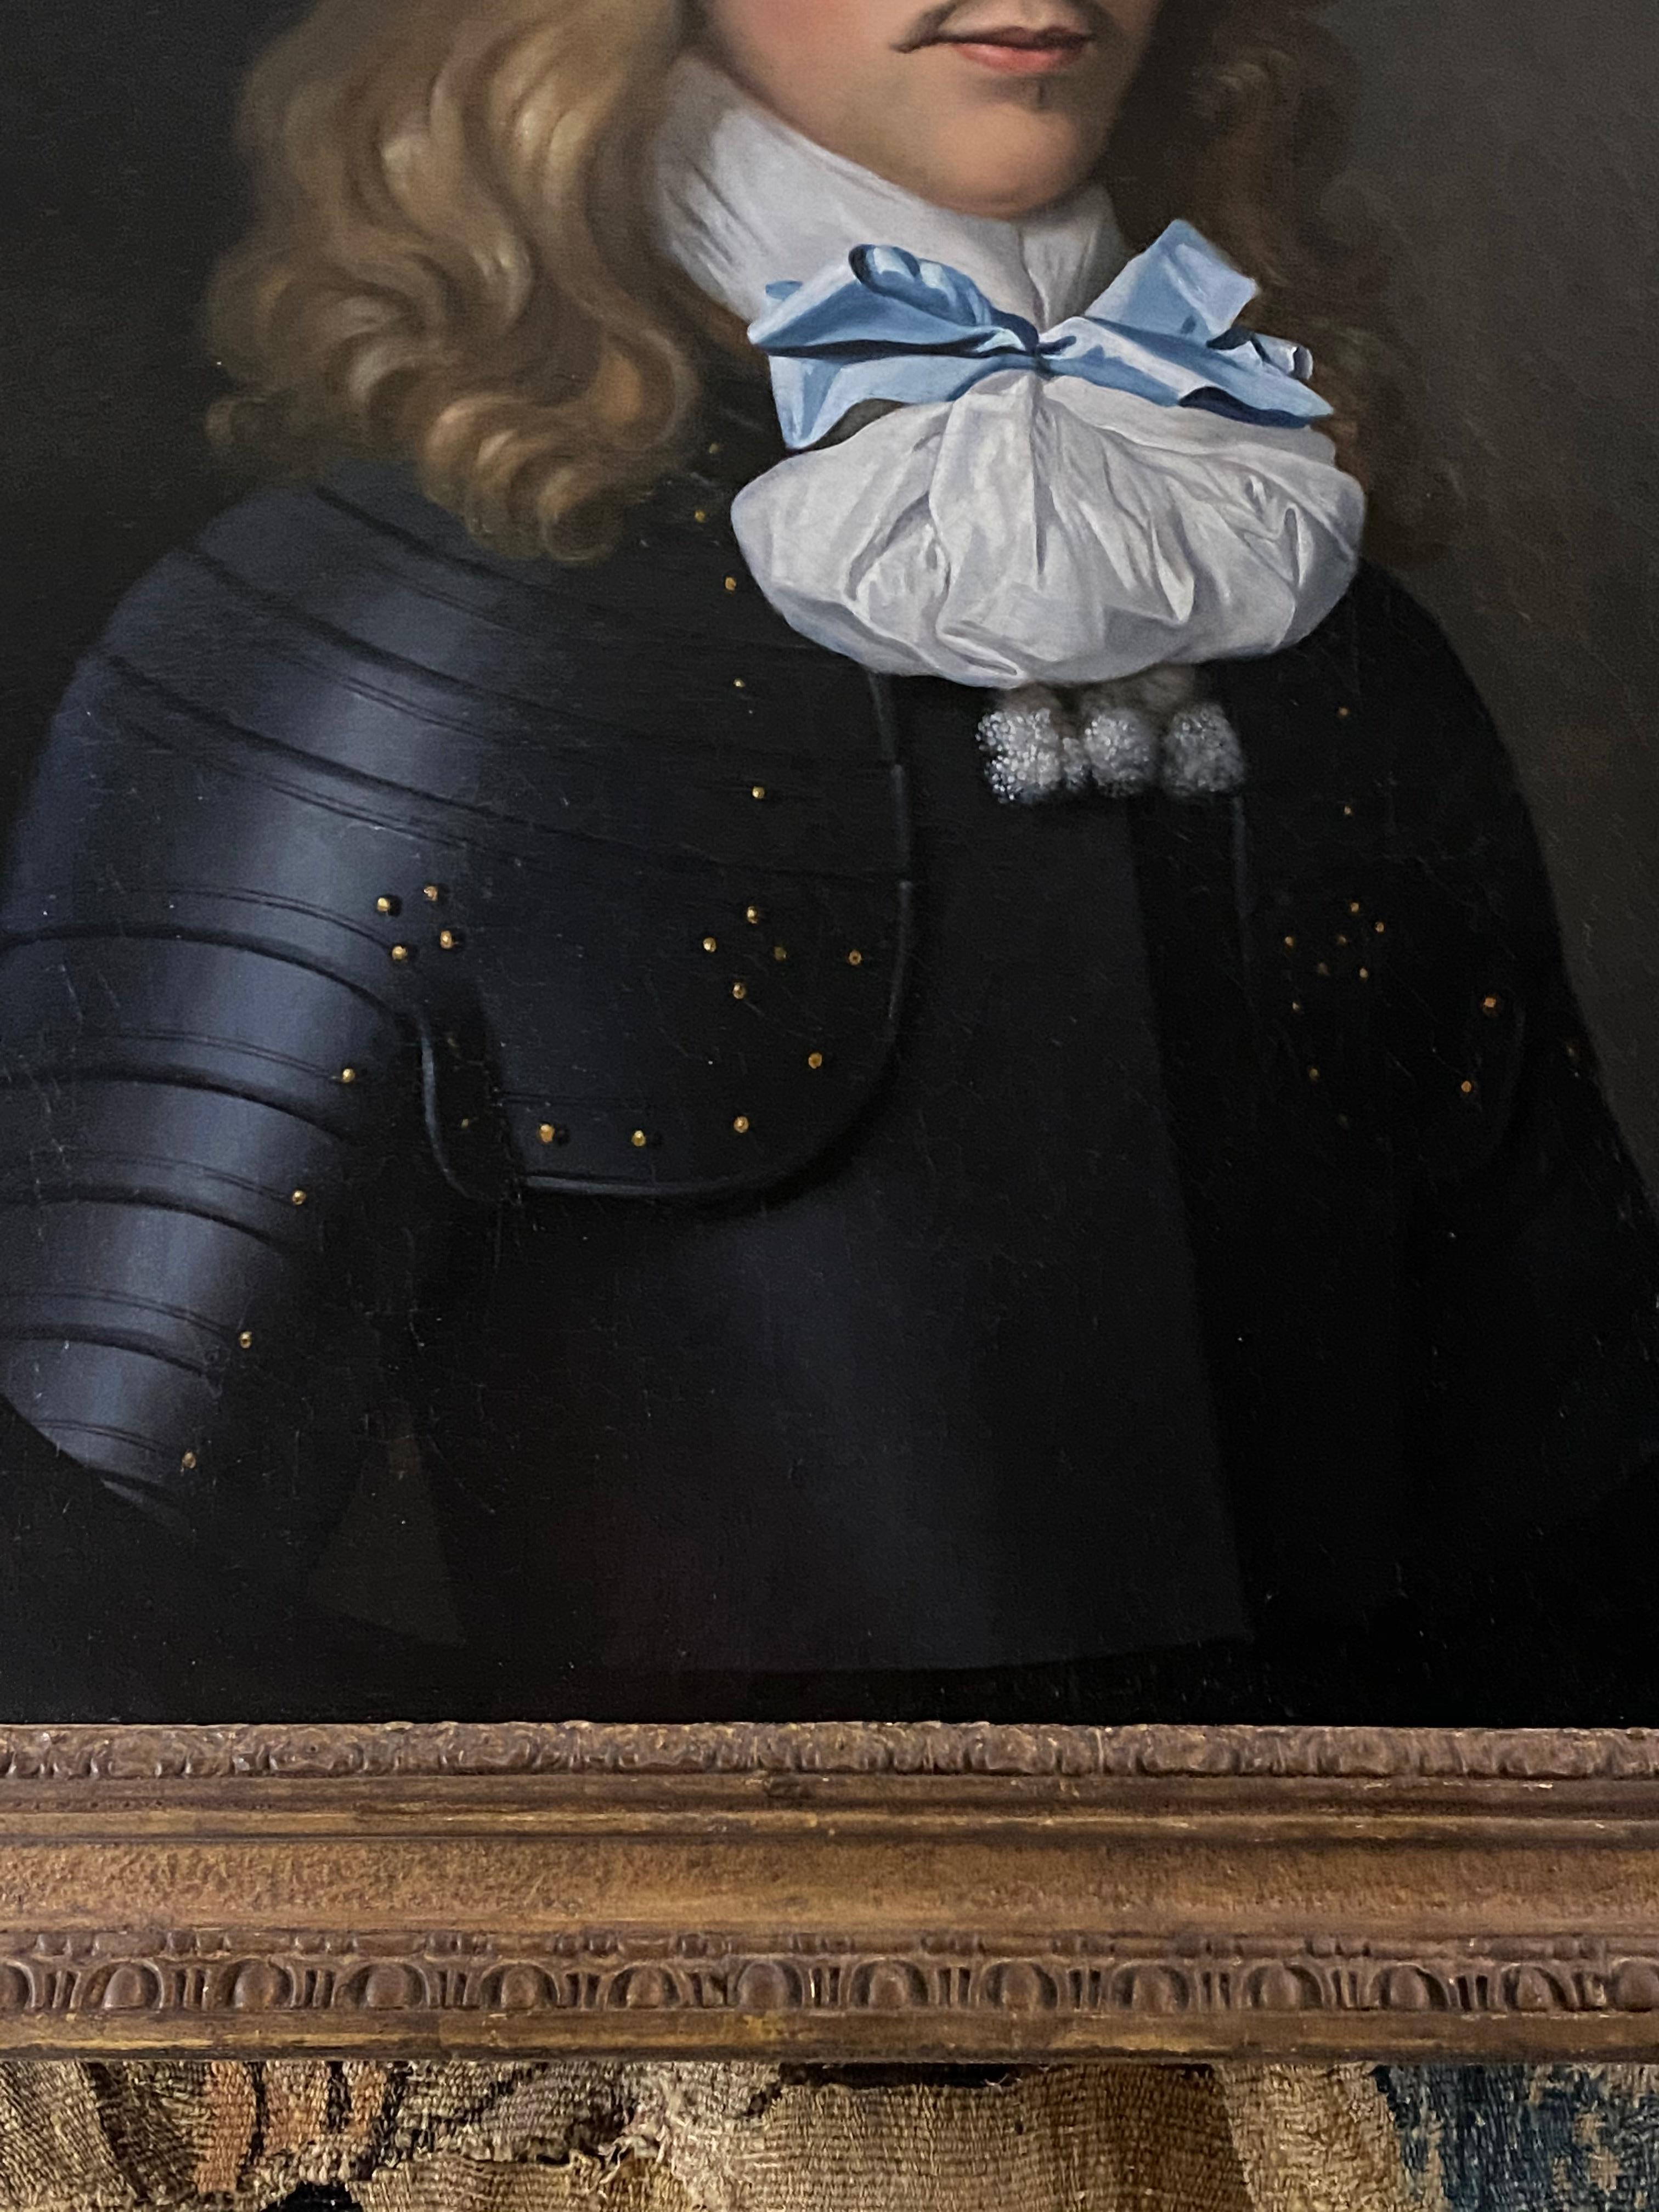 PORTRAIT OF AN OFFICER, c.1660 -  CIRCLE OF ADRIAEN HANNEMAN.
A fine, rare and highly decorative 17th Century portrait of a handsome long haired officer wearing elaborate military dress, by an artist in the circle  of Adriaen Hanneman